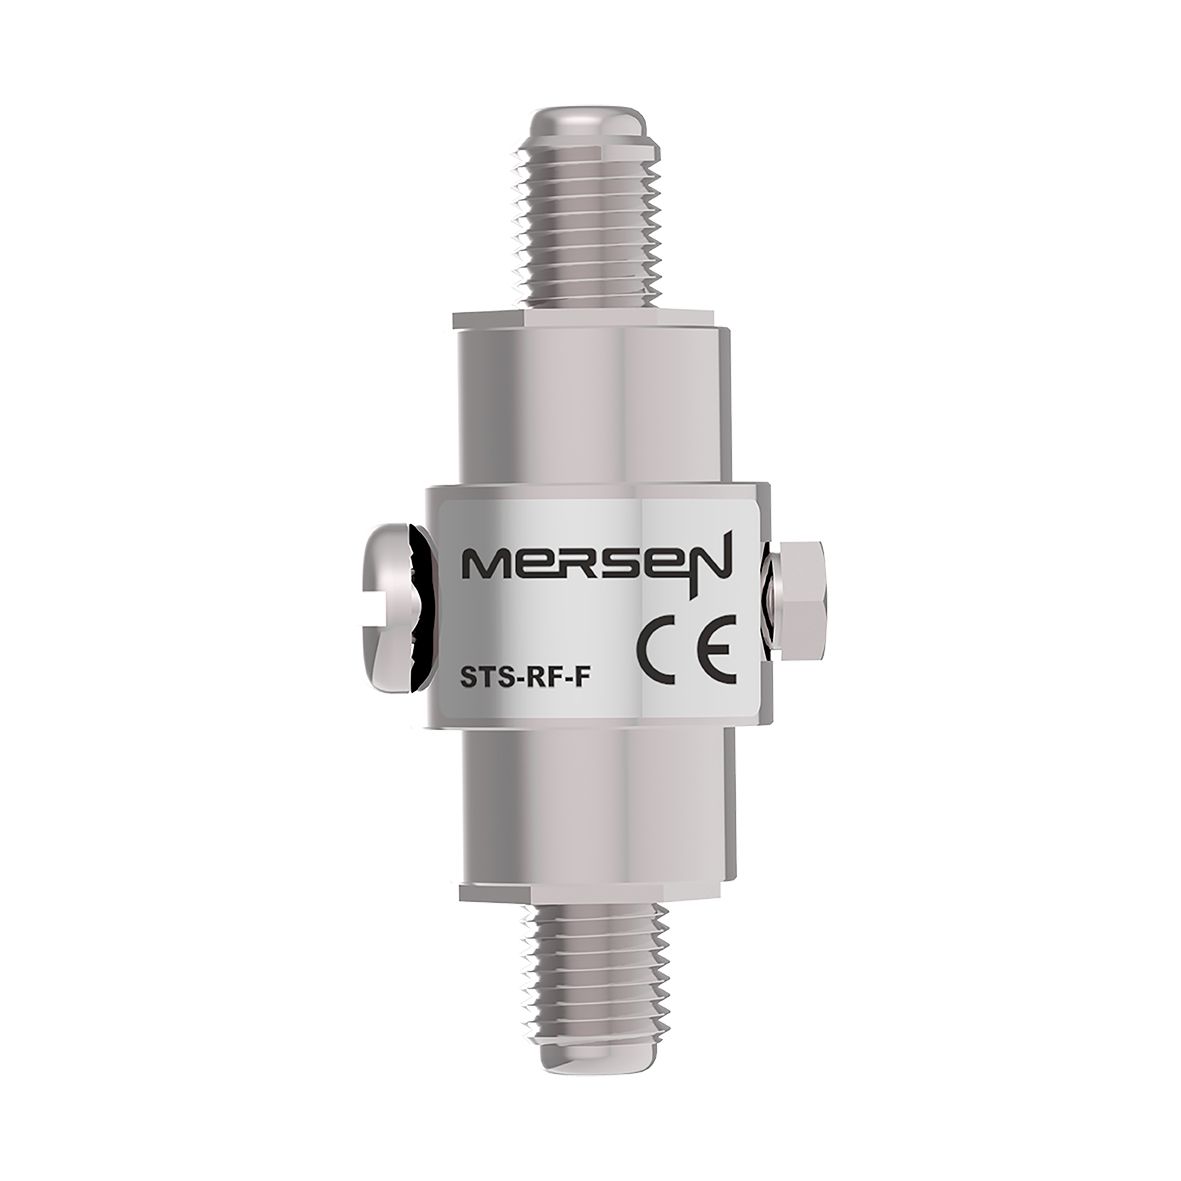 83040725 - SPD for radio frecuency signals, F connector (50 Ohms), 20 kA.